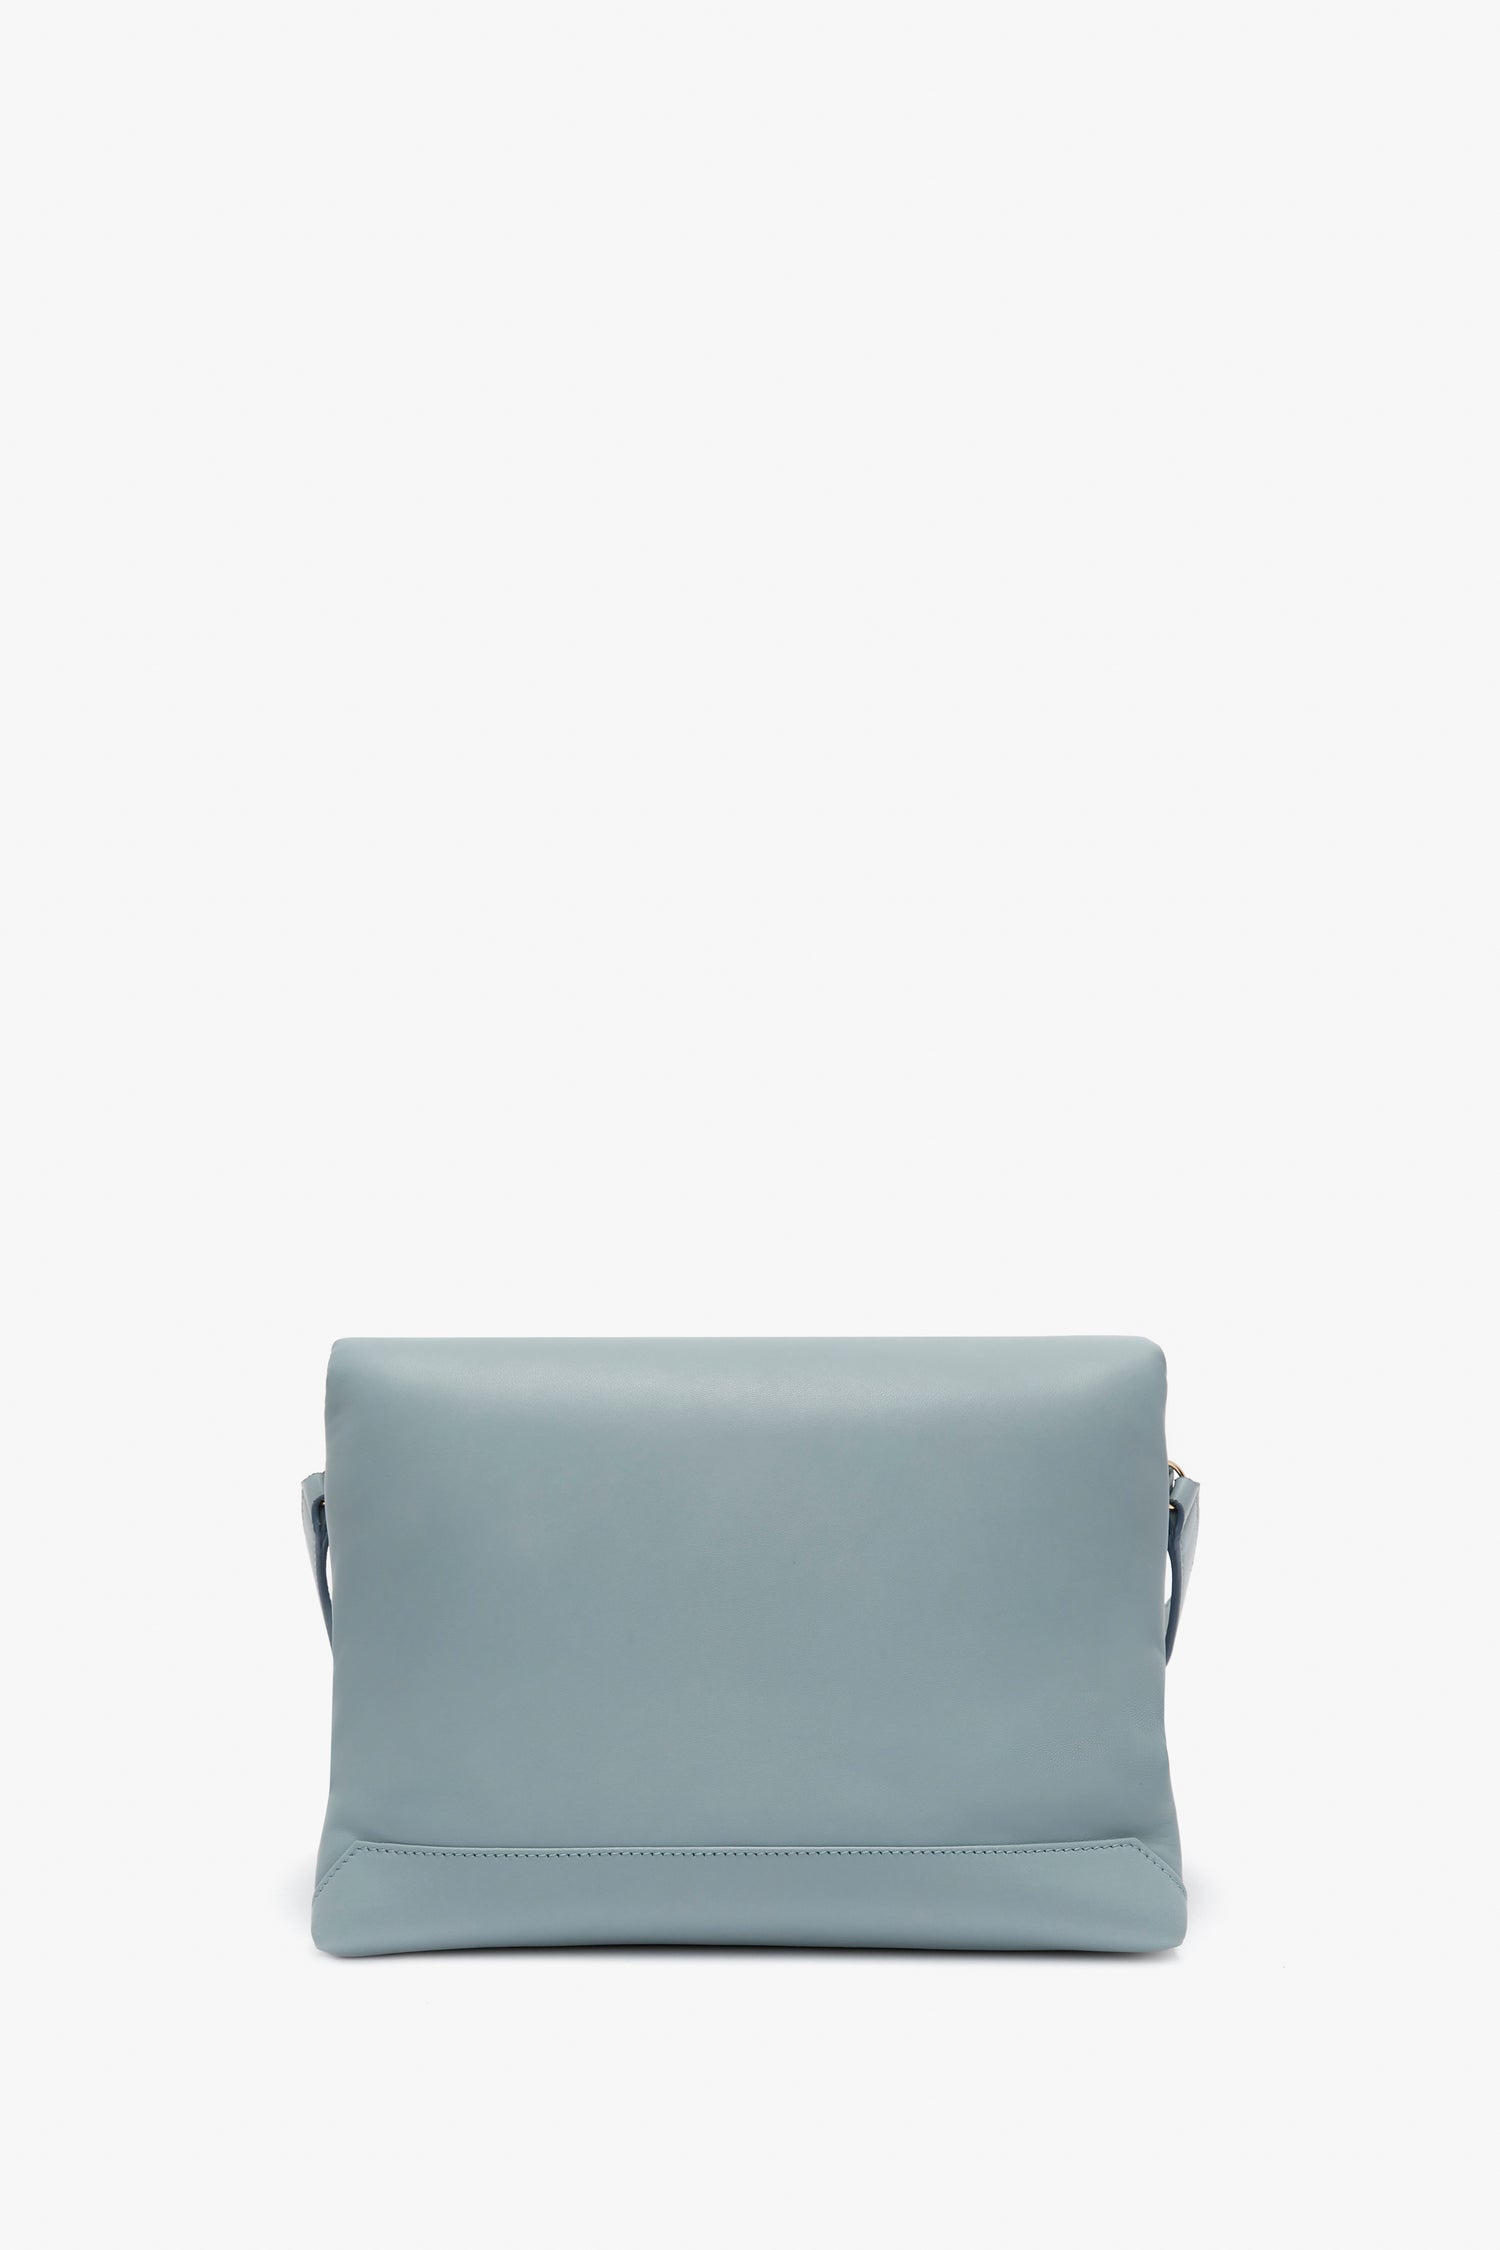 A light blue Puffy Chain Pouch With Strap In Ice Leather clutch bag by Victoria Beckham, displayed against a plain white background.